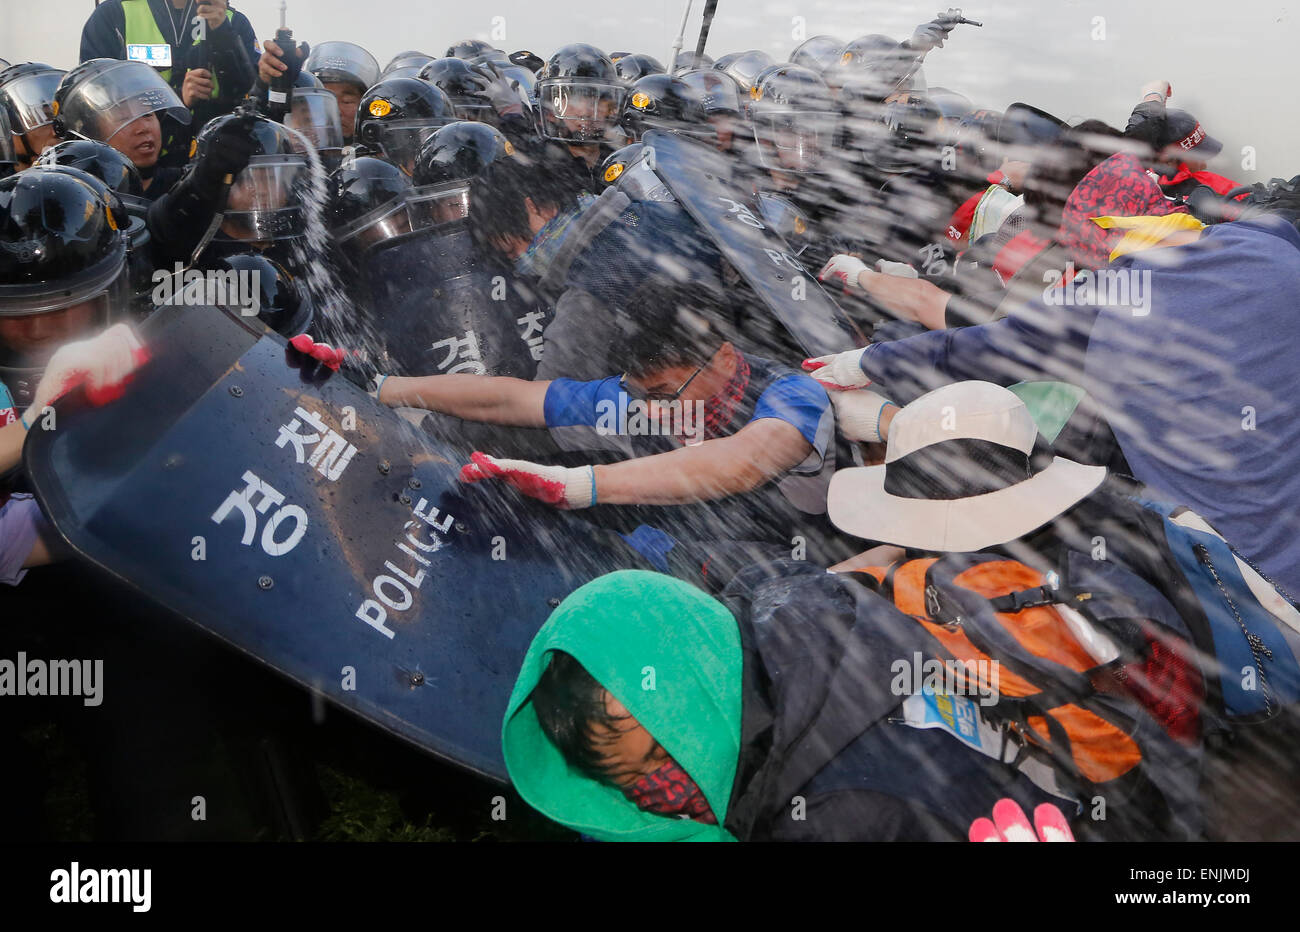 May Day protest, May 1, 2015 : Policemen use pepper spray to workers trying to march toward the presidential Blue House in Seoul, South Korea. Tens of thousands of workers held a rally on May Day in Seoul to oppose the government's plans to change the pension system for public servants and to allow more flexible labour market. They also demanded a thorough investigation into the Sewol ferry tragedy and the resignation of President Park Geun-hye. The police detained dozens of protesters. © Lee Jae-Won/AFLO/Alamy Live News Stock Photo